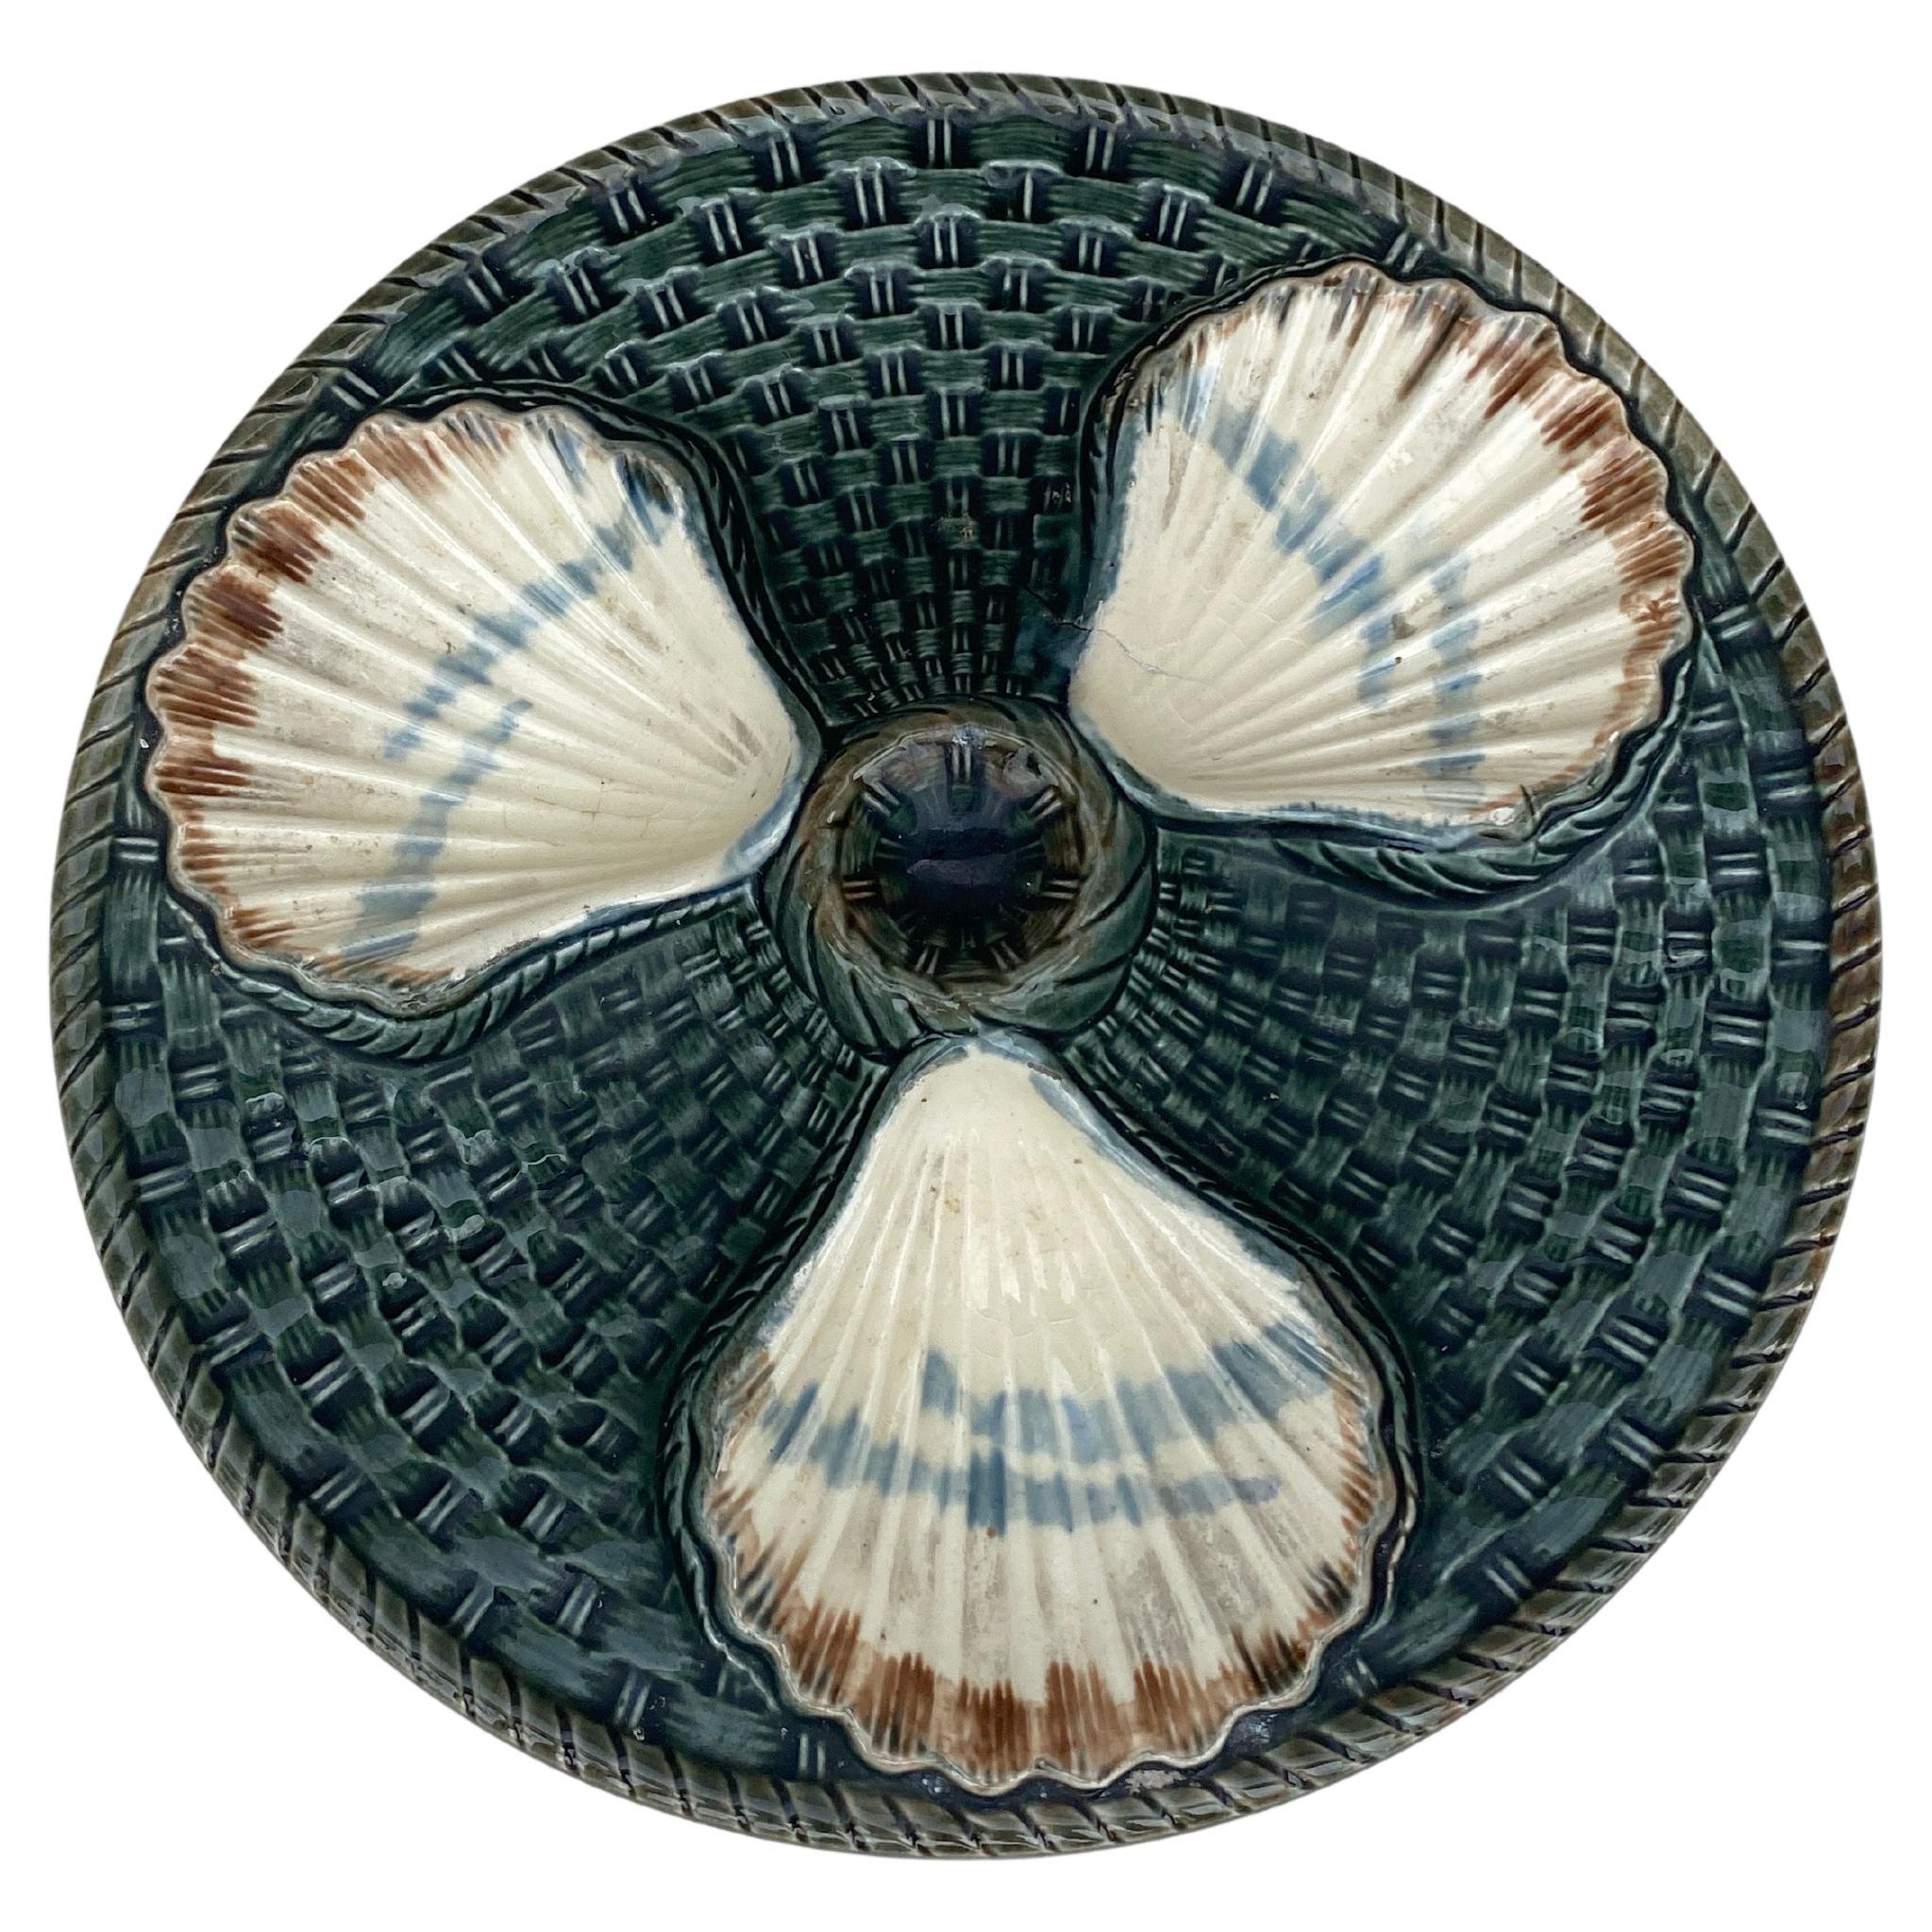 Rare 19th Majolica three shells oyster wall plate signed longchamp.
Diameter / 8 inches.